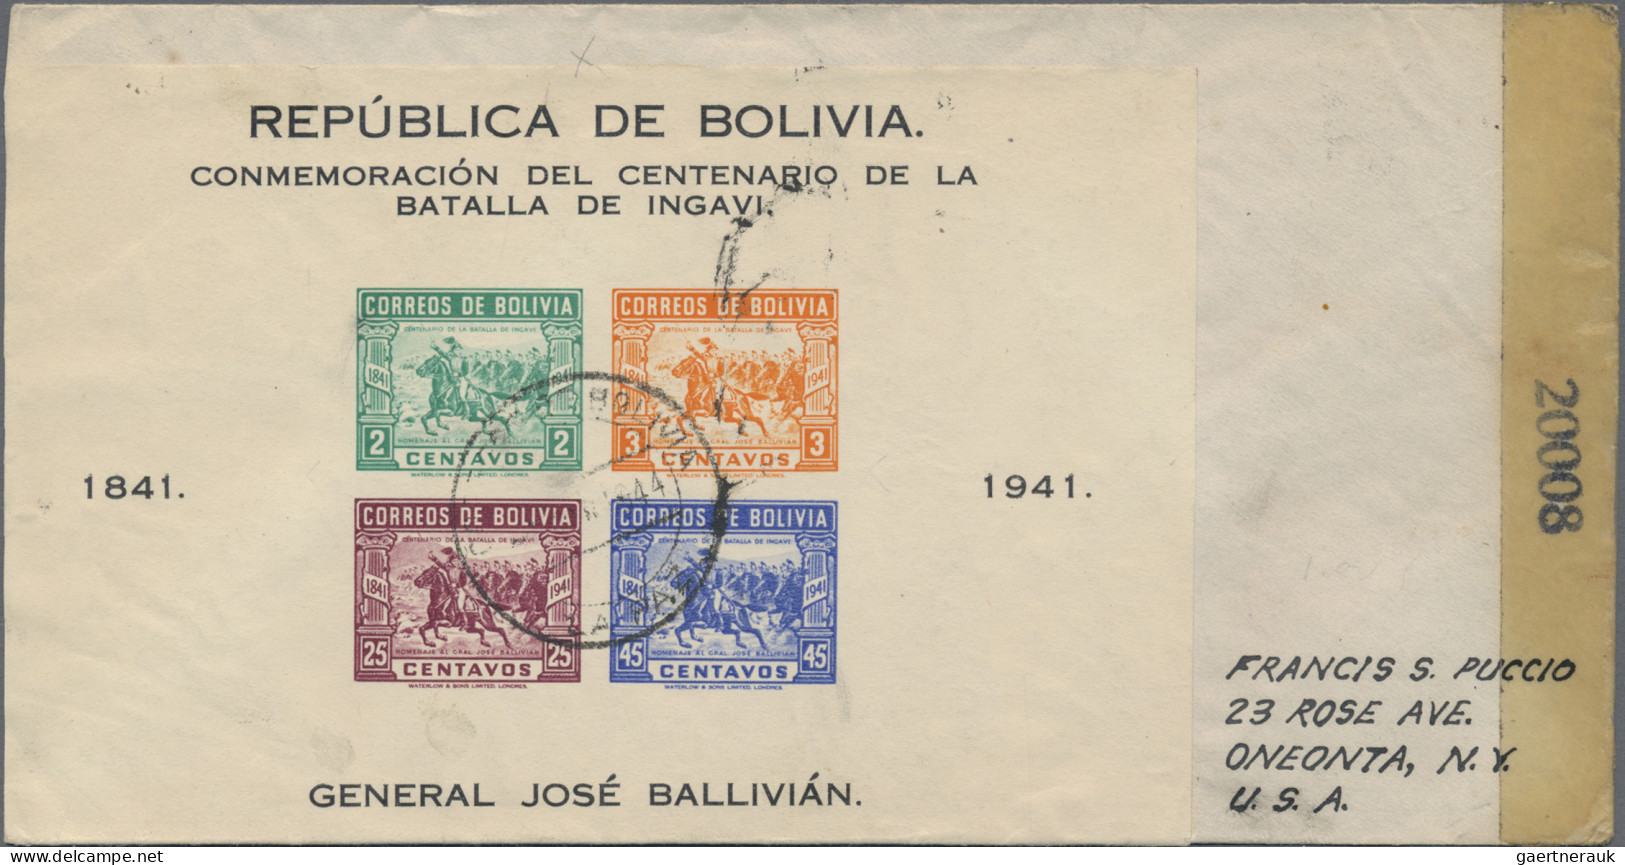 Bolivia: 1890/1960 (ca.), assortment of 36 covers/cards incl. (uprated) statione